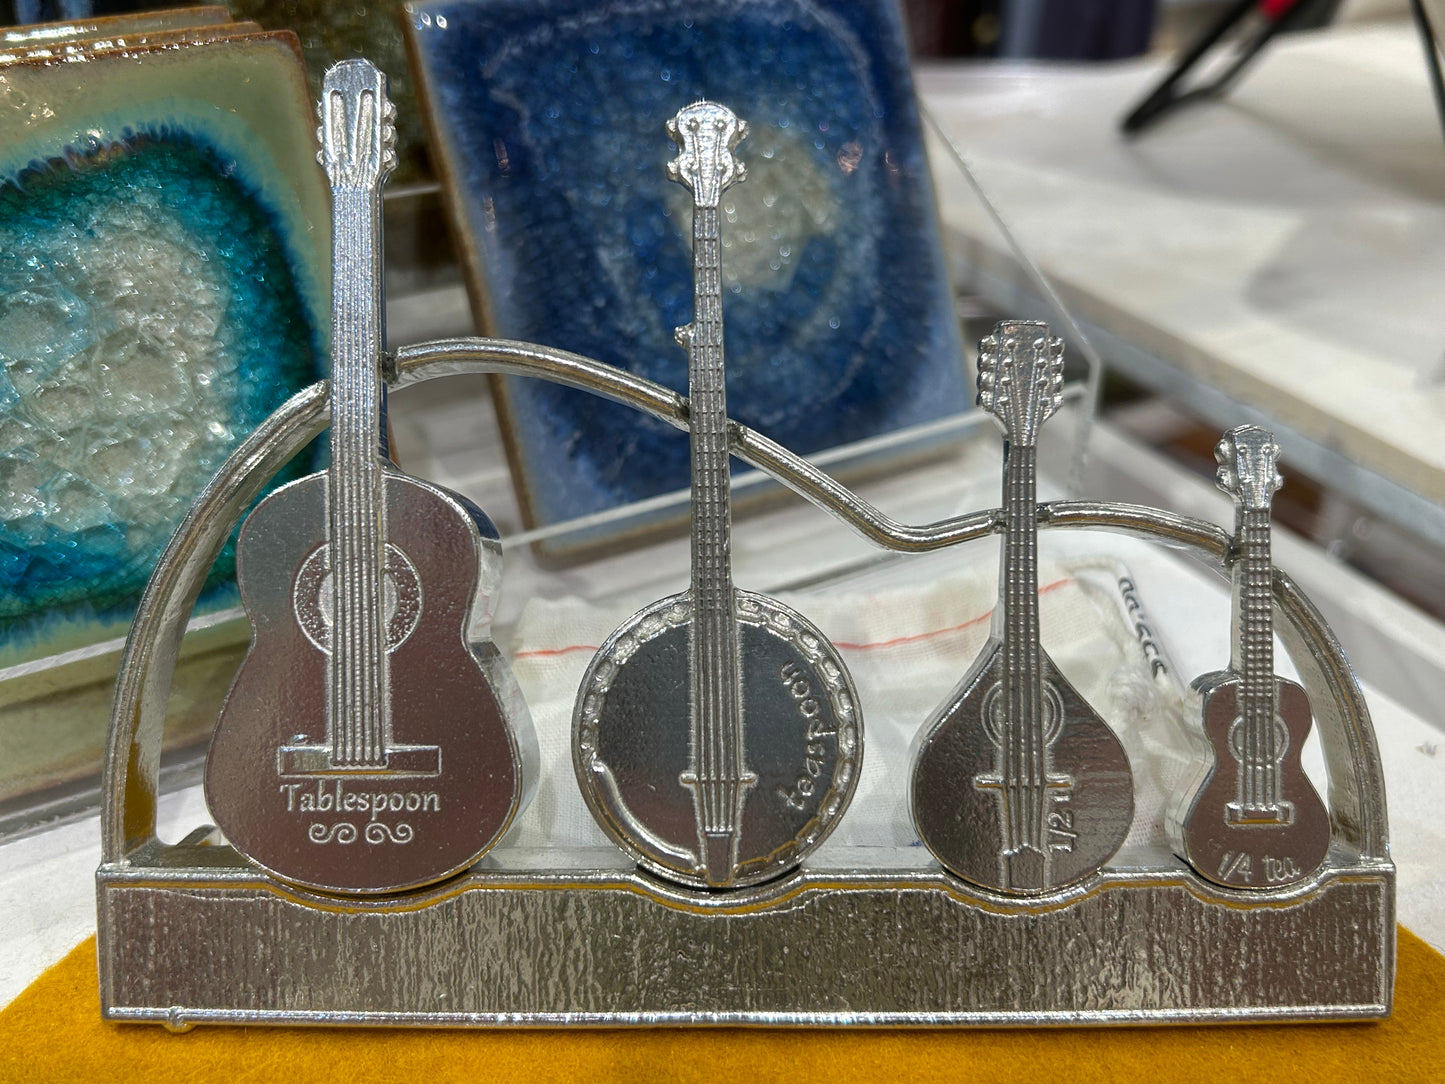 Stringed Instruments Measuring Spoons with Stand